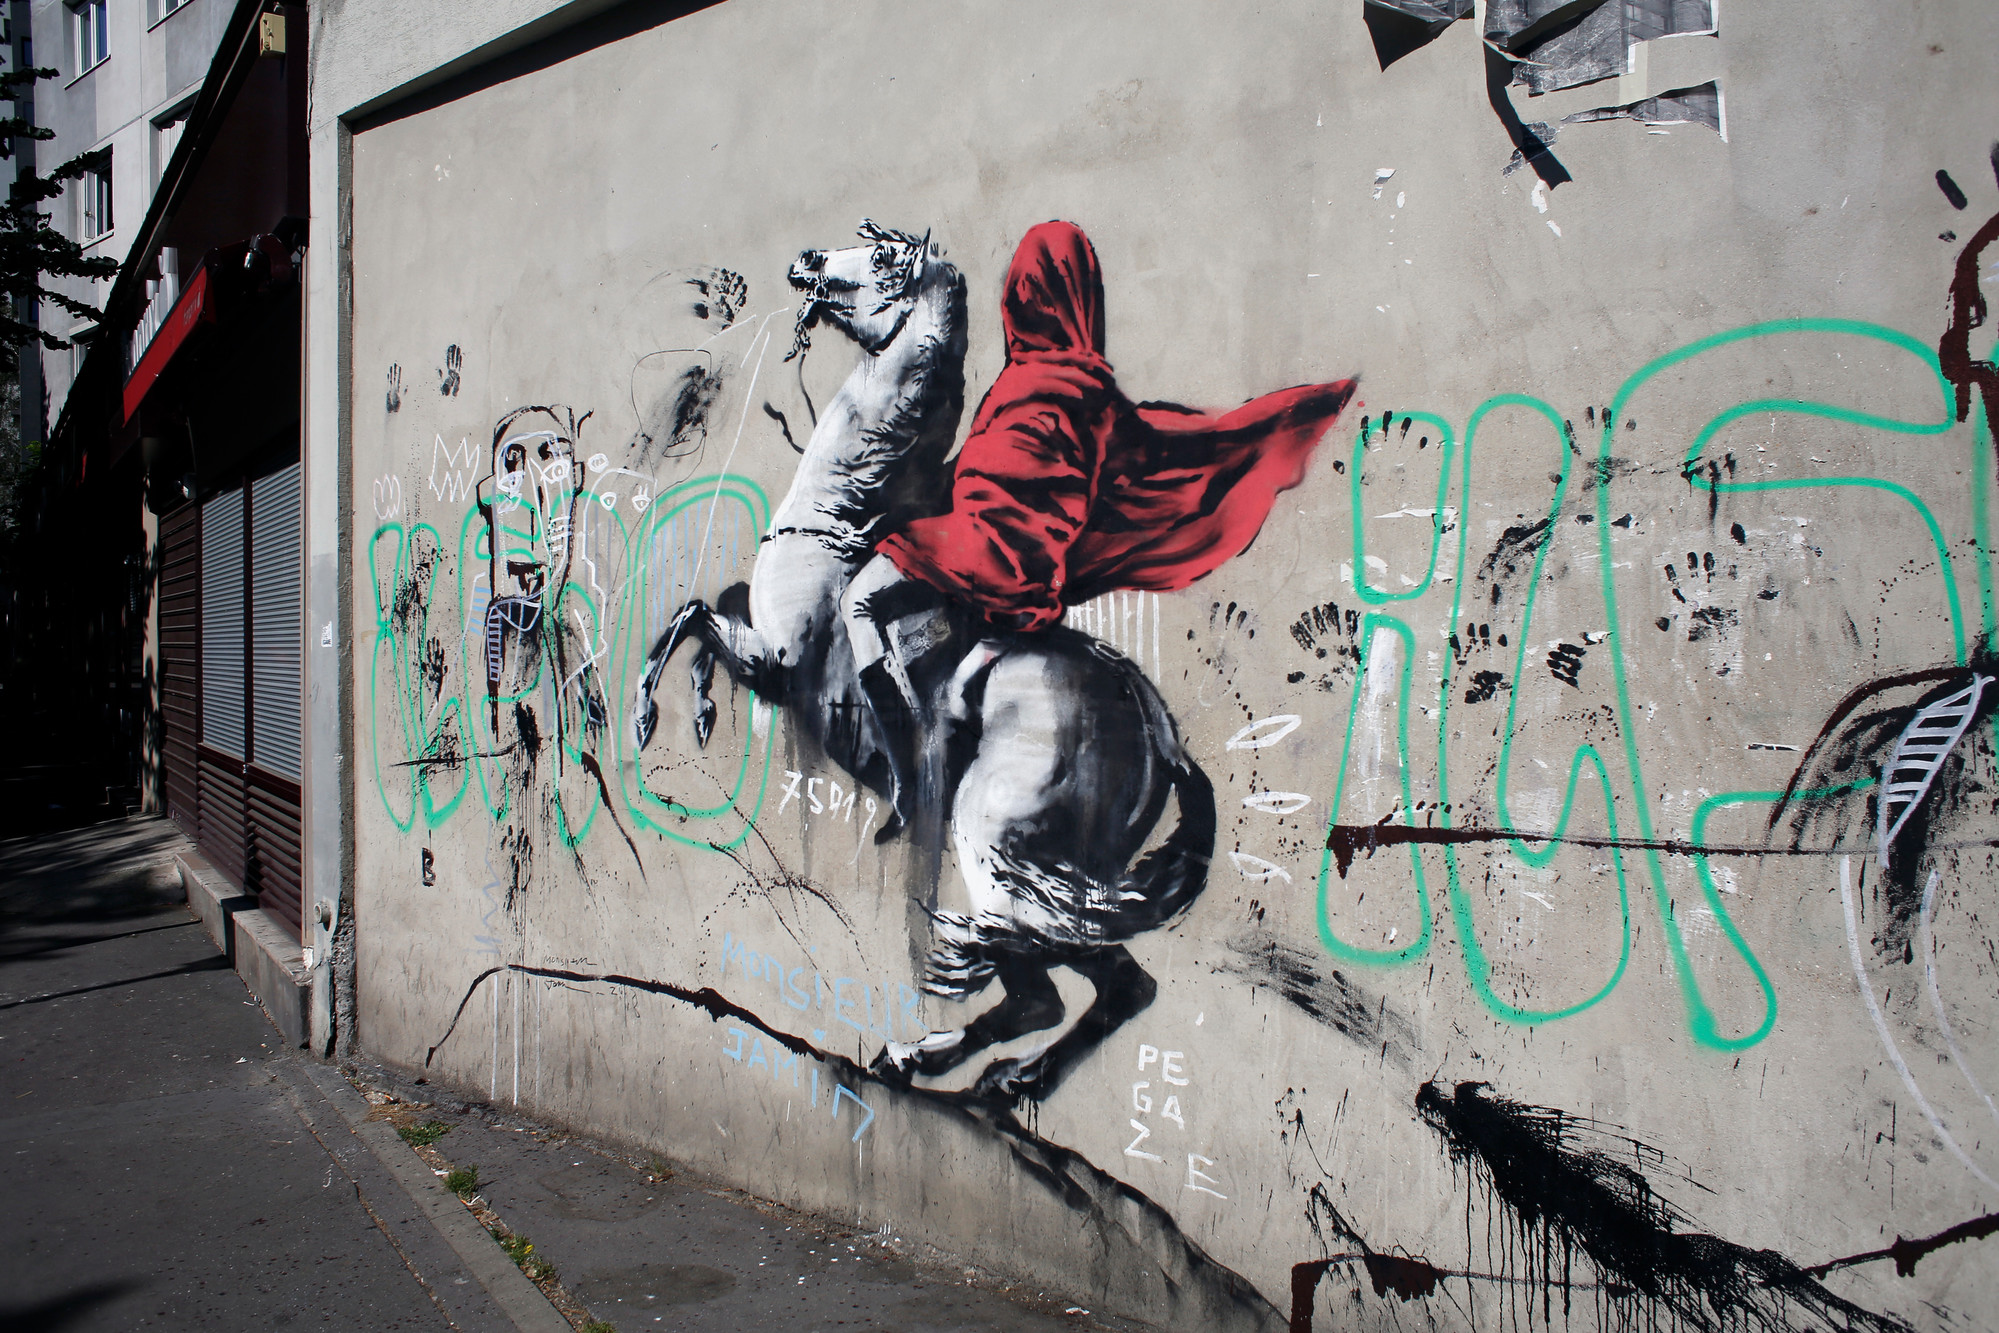 Paris splashed with works by street artist Banksy | The Sumter Item